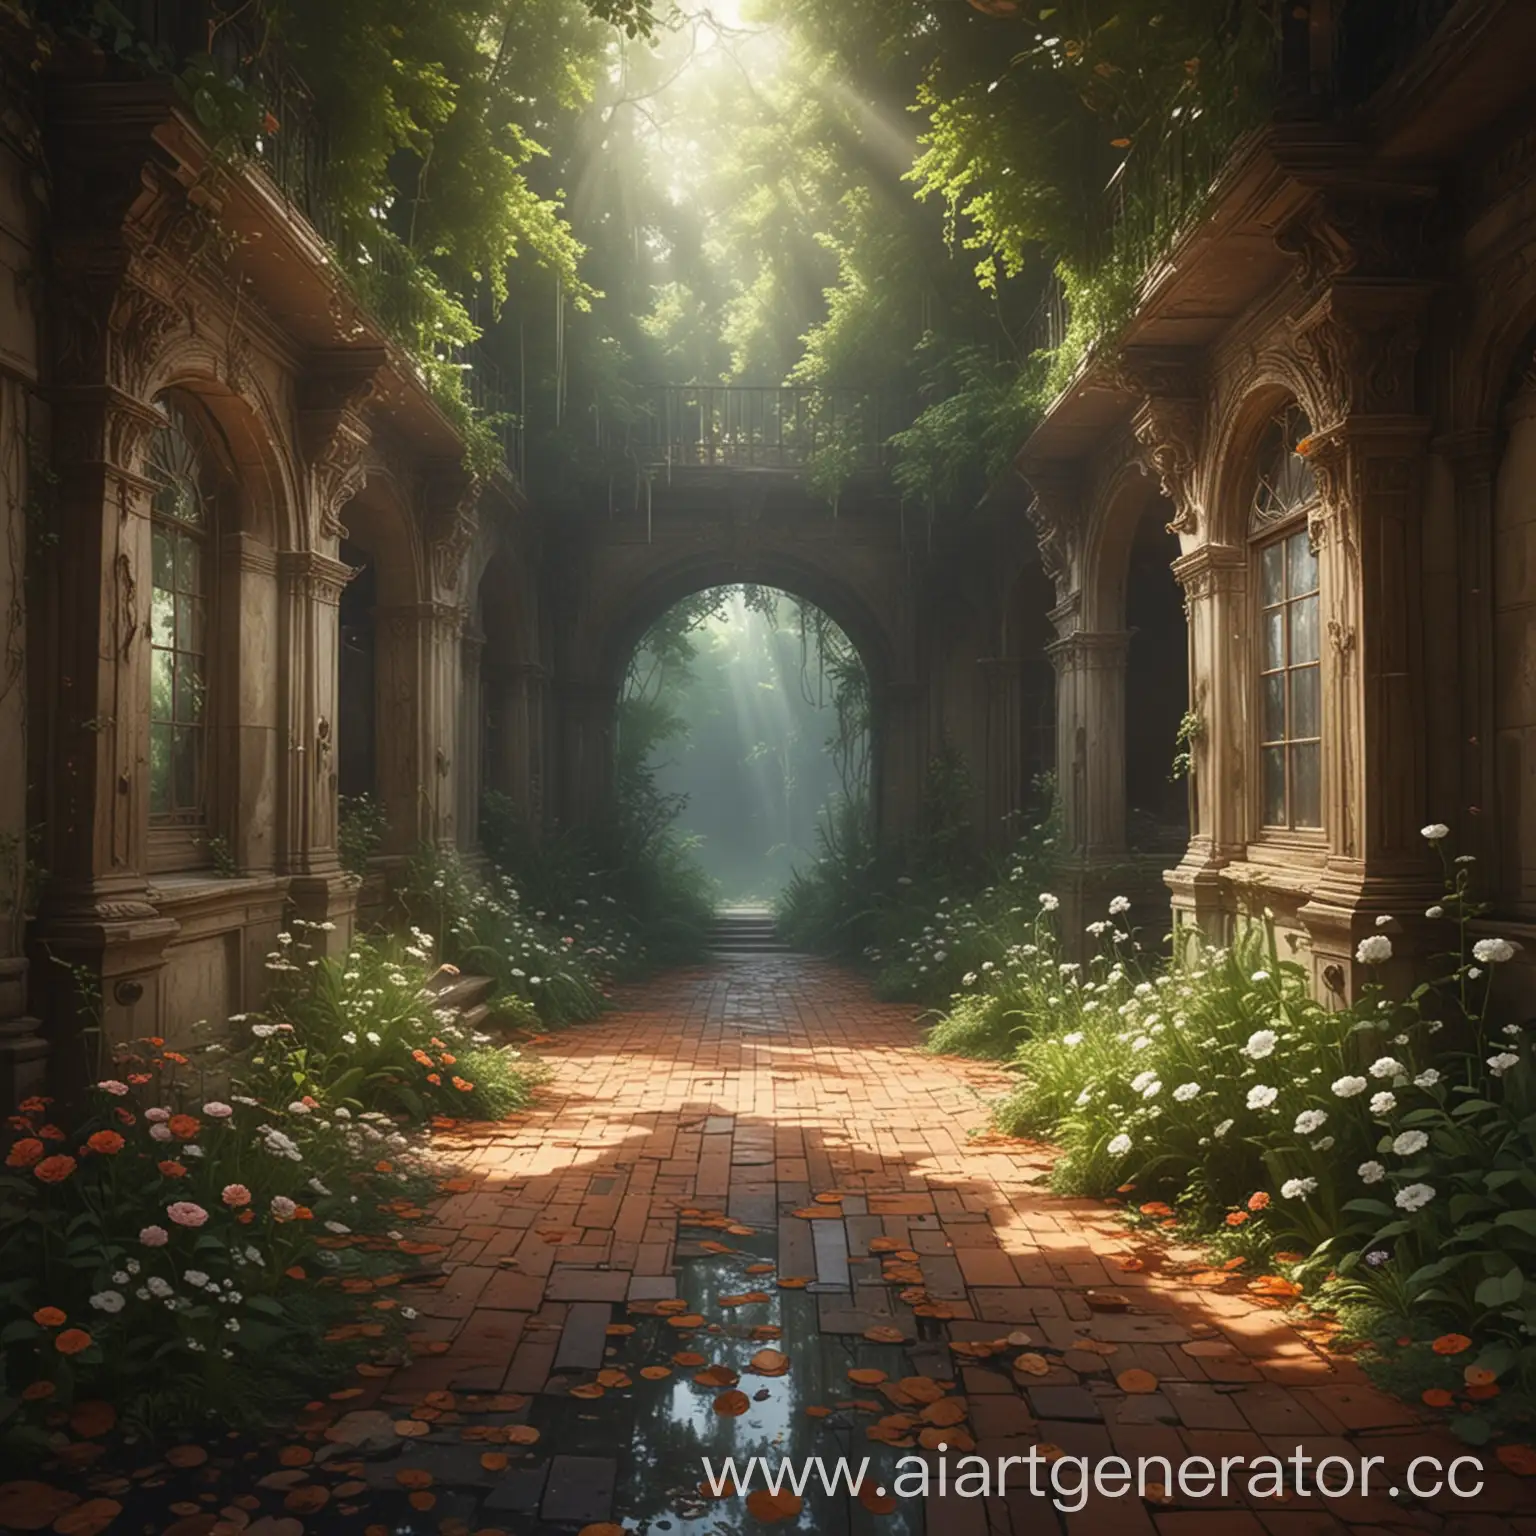 Realistic-Dreamcore-Aesthetics-Ethereal-Scene-with-Surreal-Elements